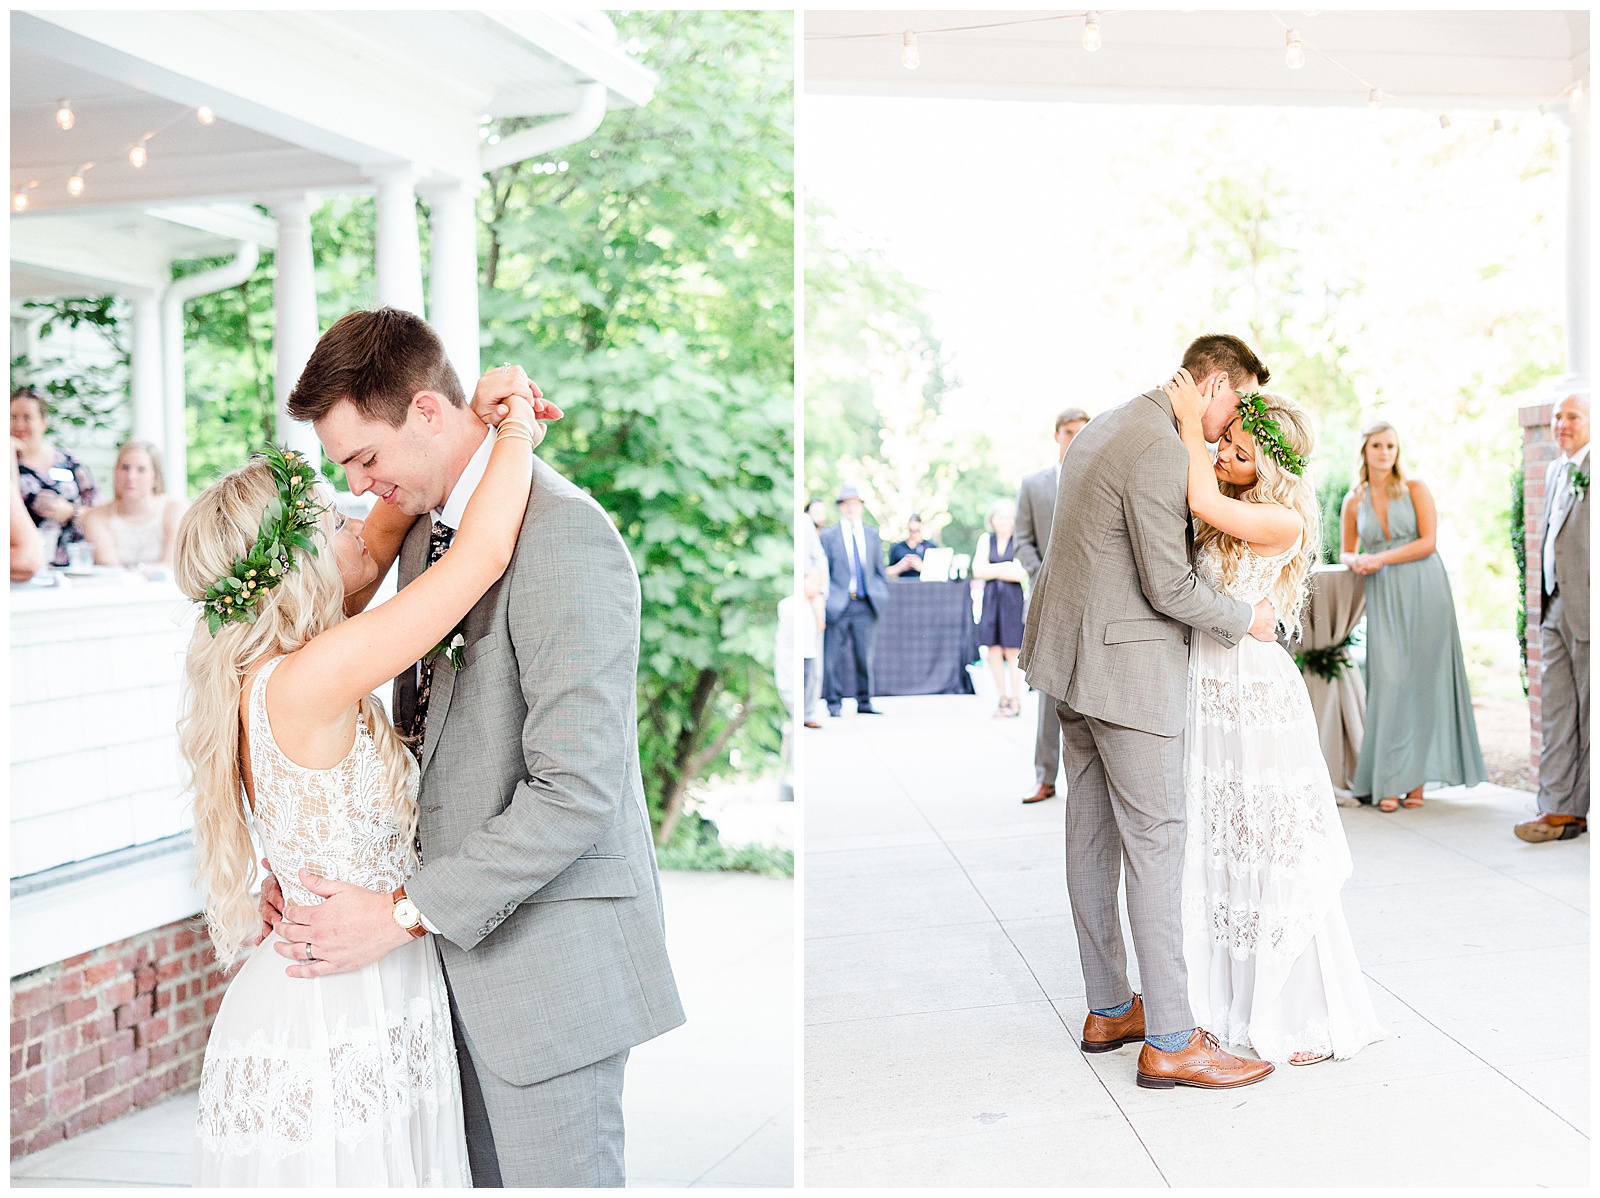 Emotional Bohemian Bride and Groom first dance from Boho Chic Summer Wedding in Charlotte, NC | check out the full wedding at KevynDixonPhoto.com